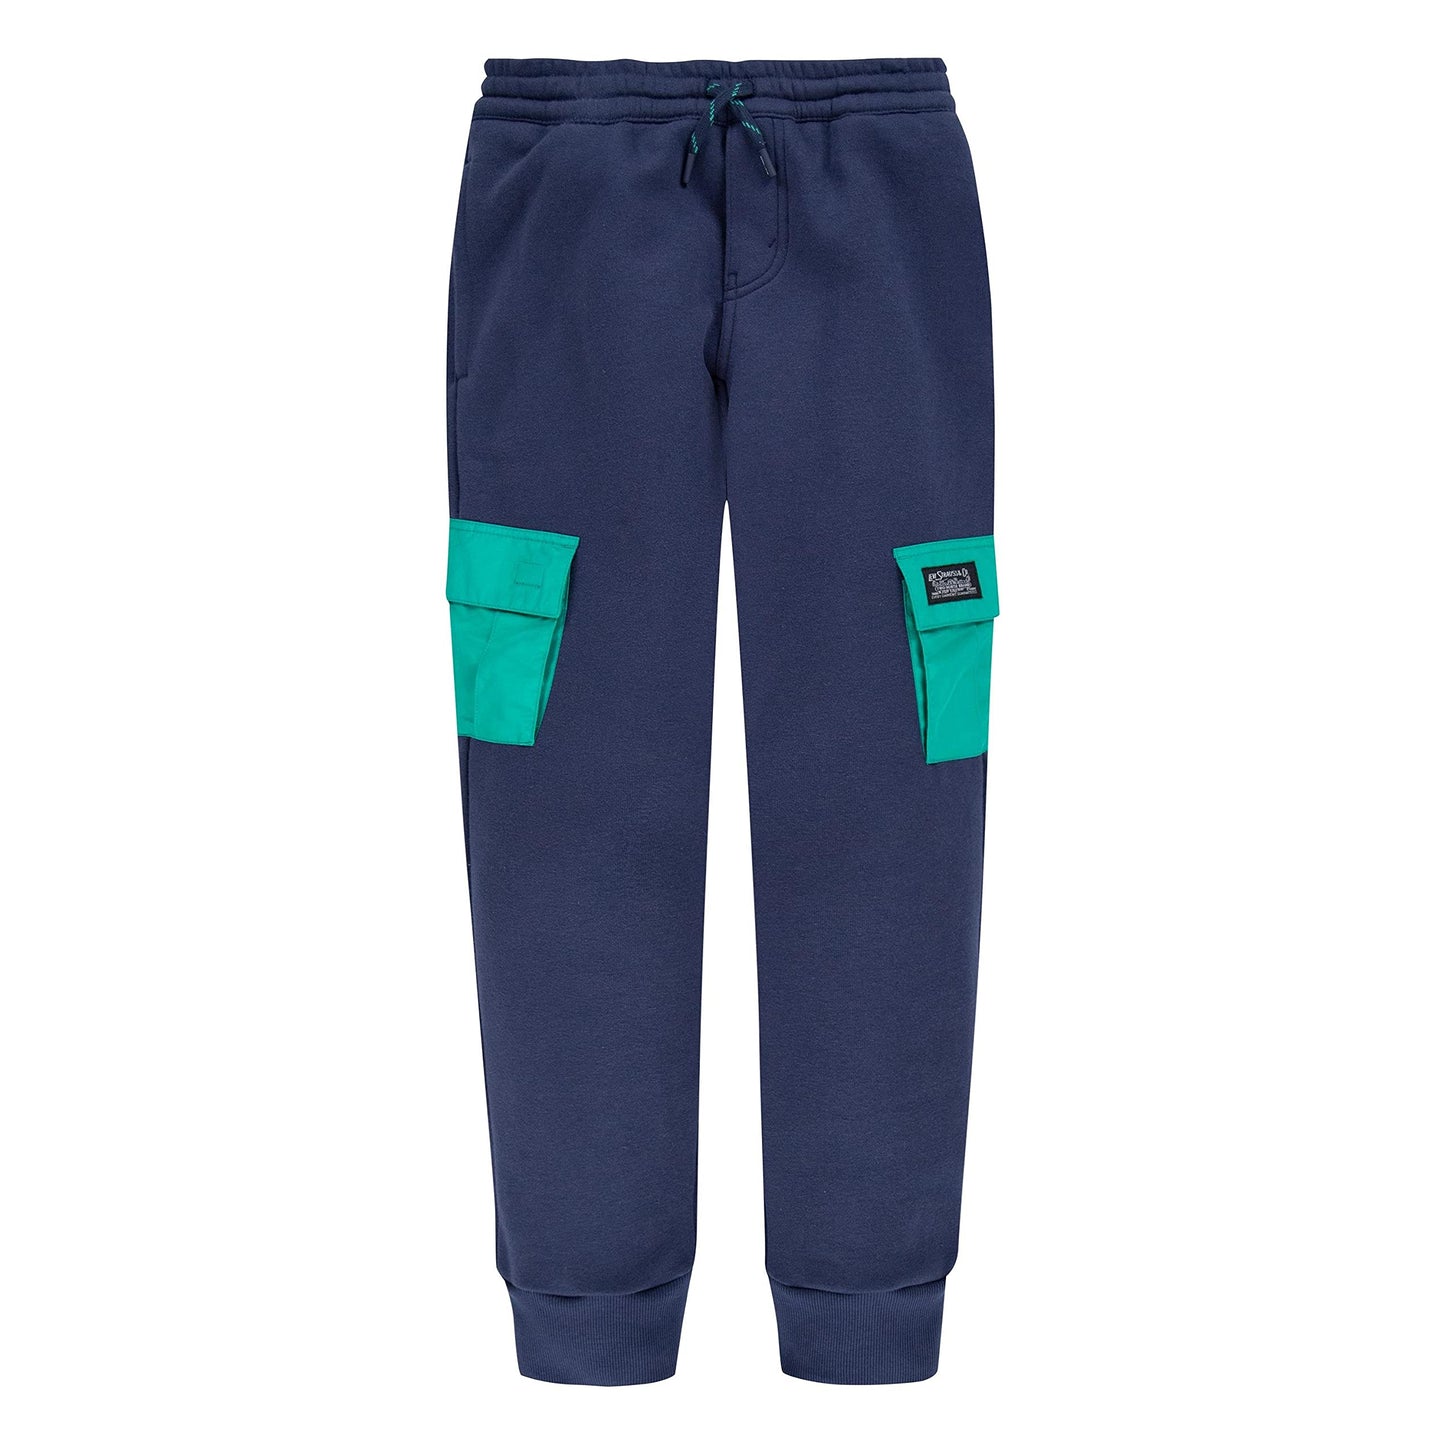 Image 1 of Knit Cargo Joggers (Toddler)